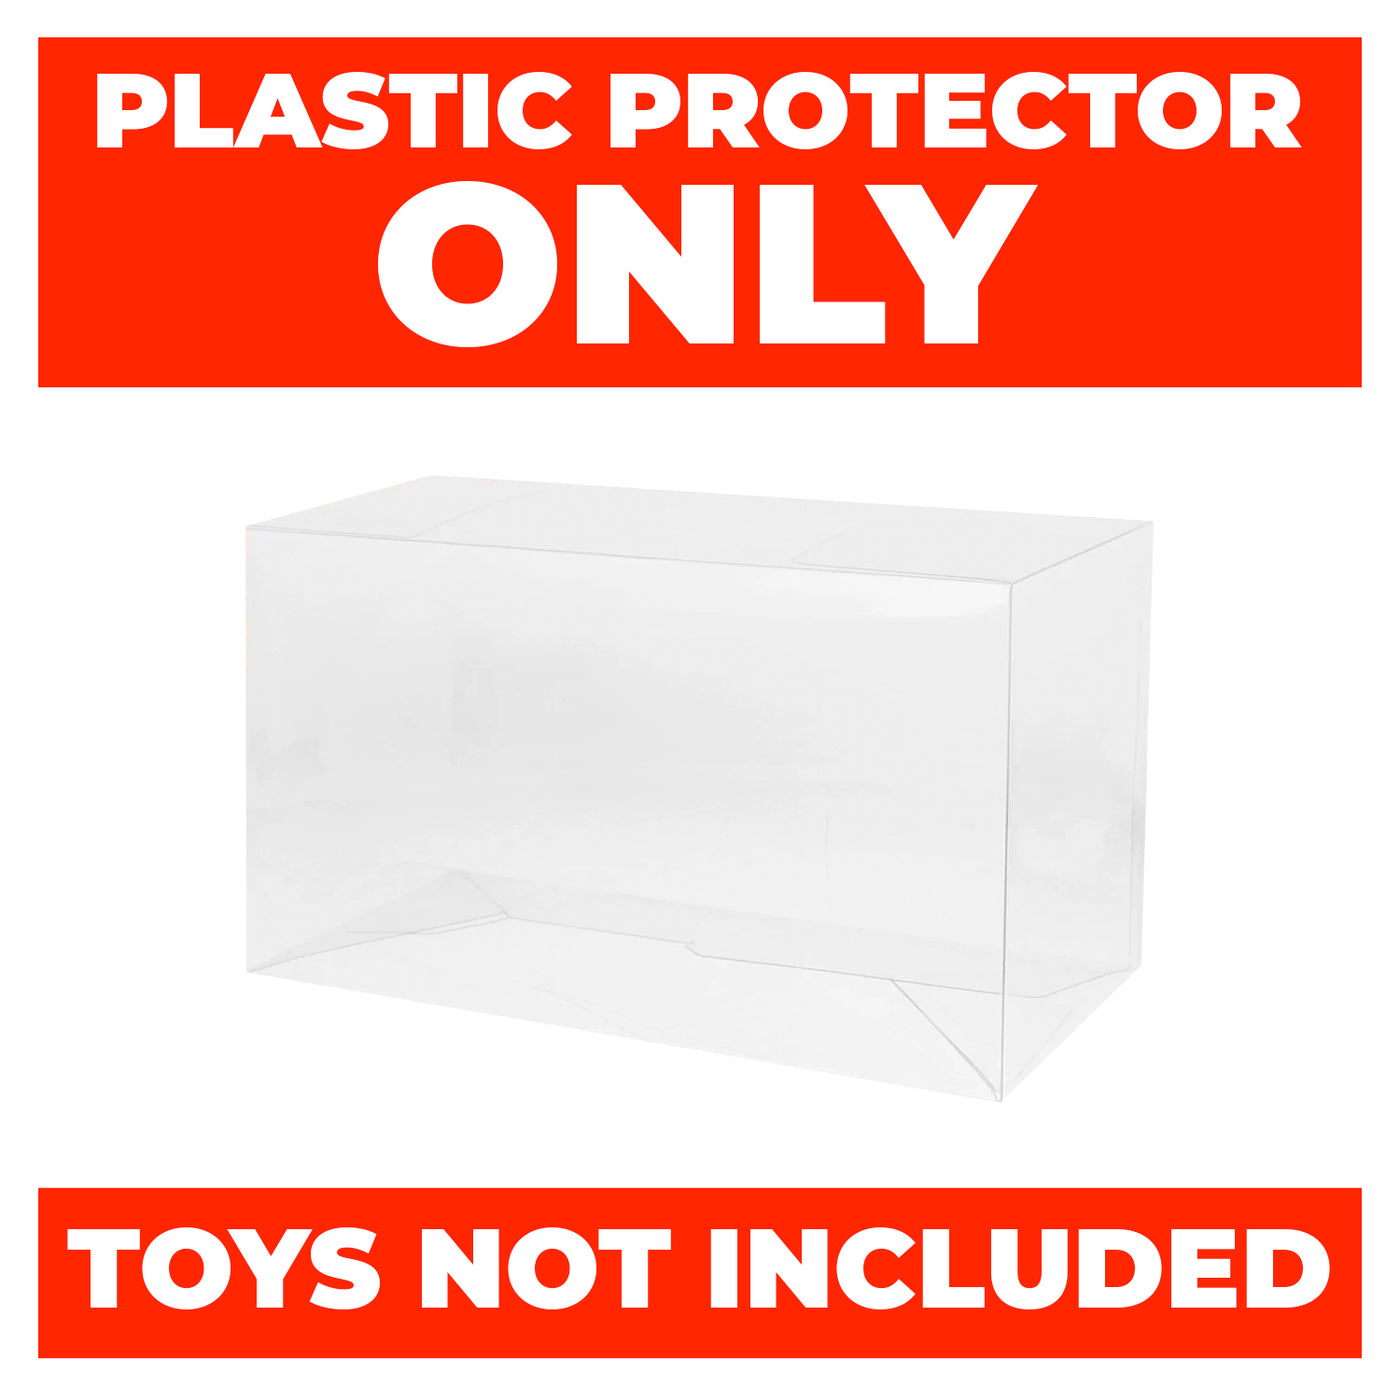 FUNKO CEREAL Pop Protectors for Funkos (50mm thick) 10.5h x 7w x 2.5d